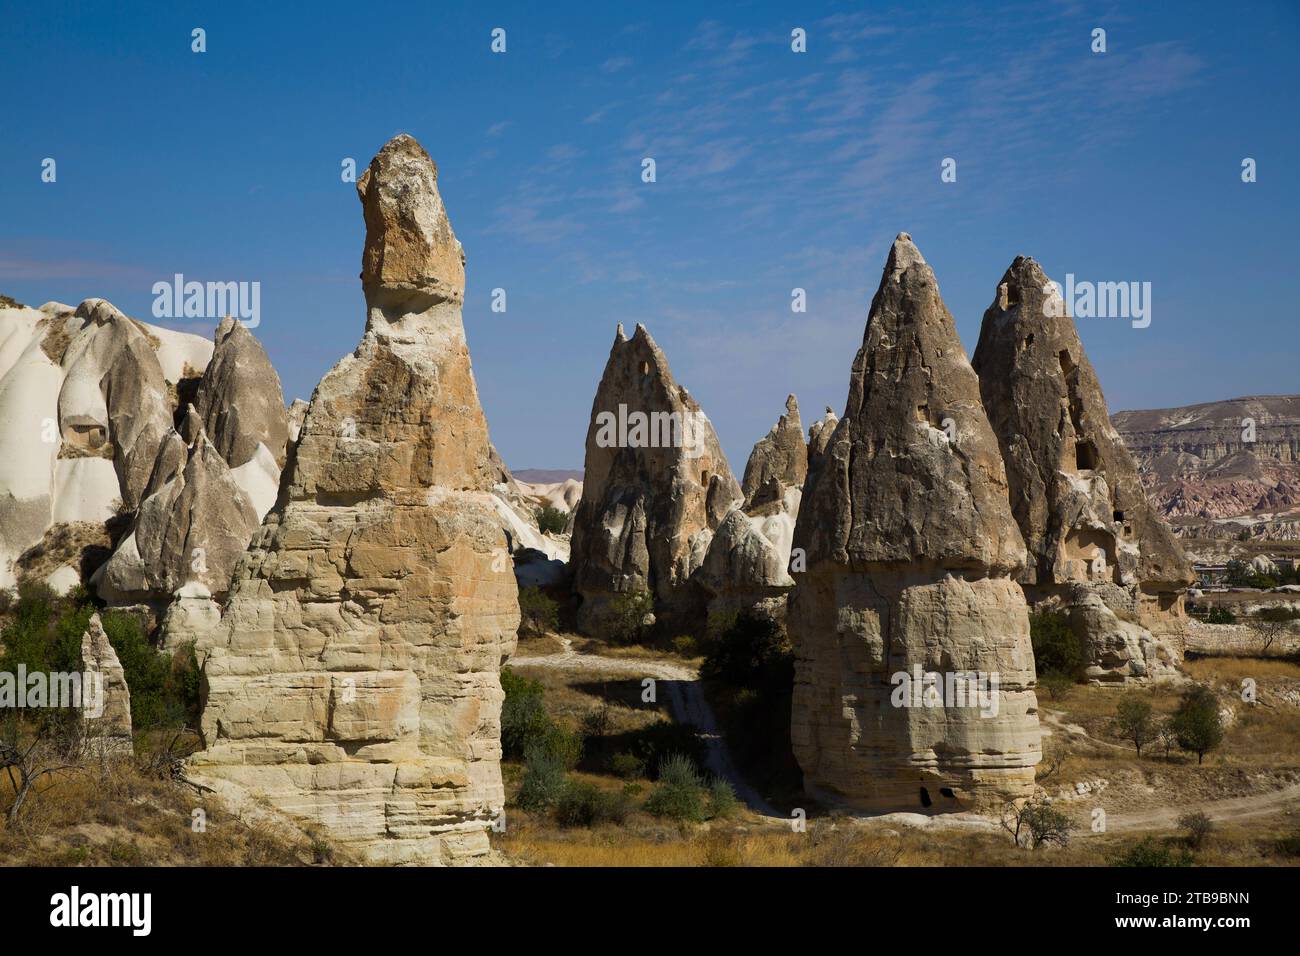 Cave Houses carved into the volcanic rock formations, Fairy Chimneys, against a bright blue sky near the town of Goreme in Pigeon Valley, Cappadoci... Stock Photo